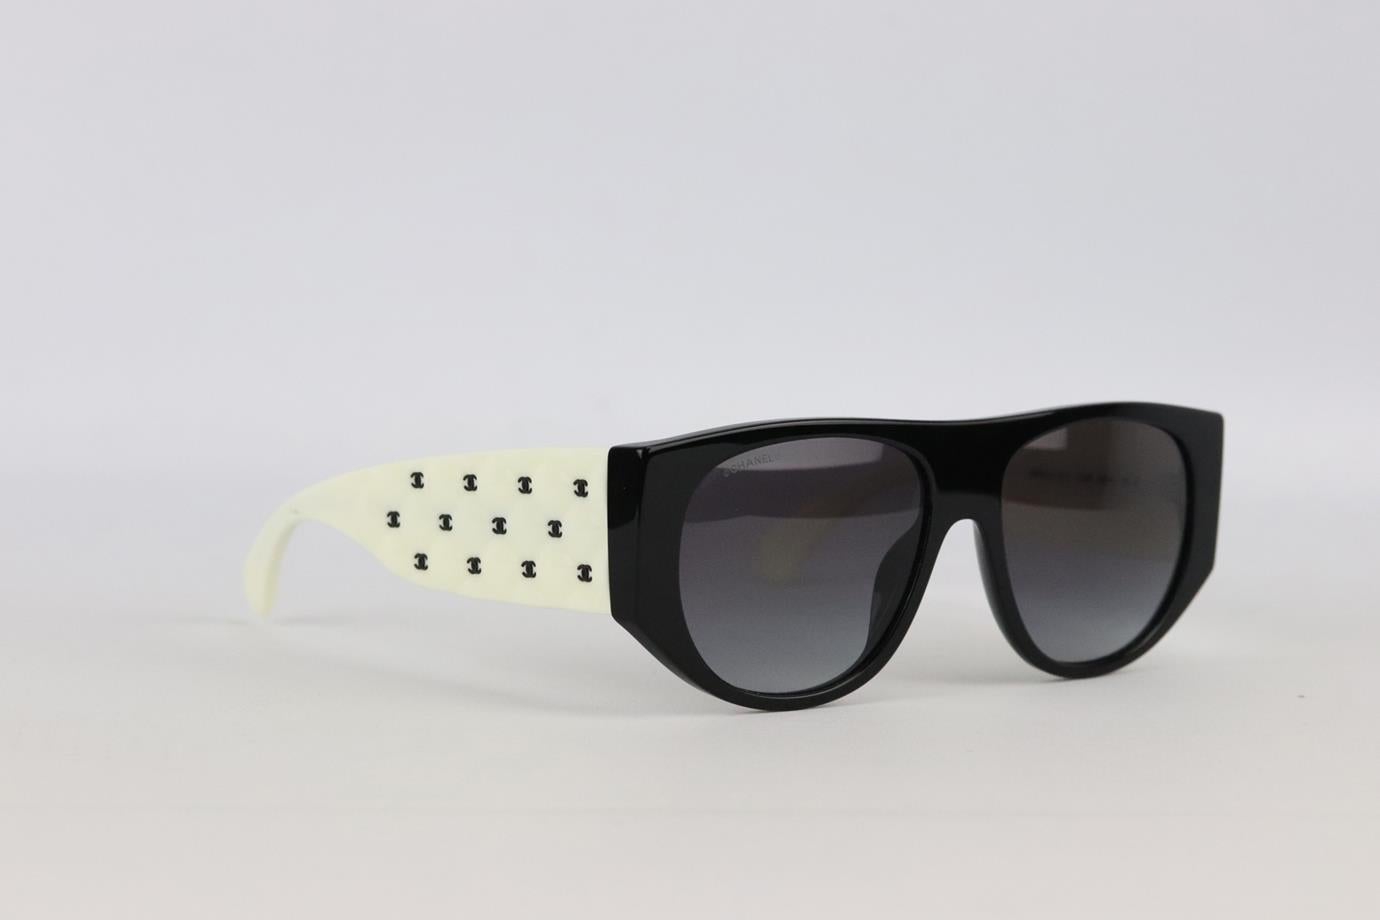 Chanel 2022 cc detailed d frame acetate sunglasses. Black and cream. Comes with case. Style Code: S65613N. Very good condition - No sign of wear; see pictures.